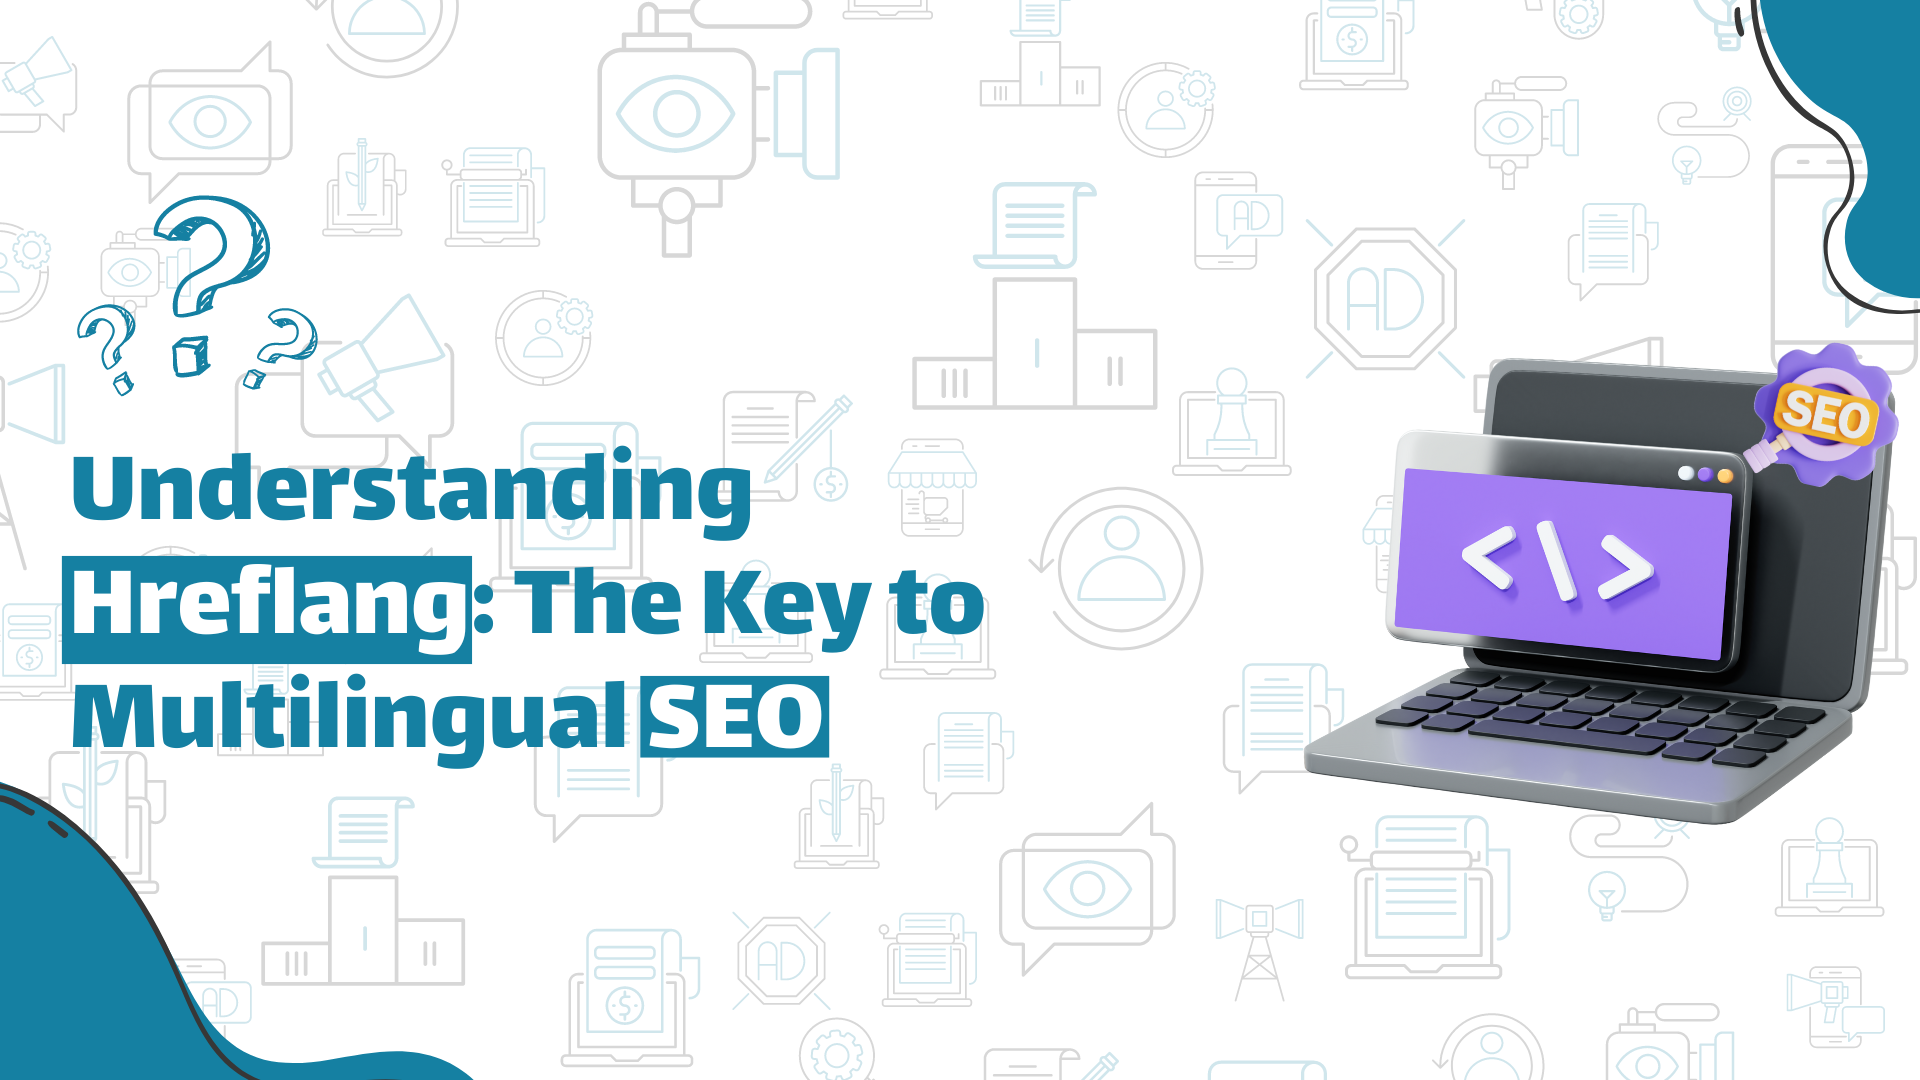 An infographic on ‘Understanding Hreflang: The Key to Multilingual SEO’ featuring a laptop with code symbols and various SEO-related icons on a light background.” This description encapsulates the main elements and the topic presented in the image, making it accessible for screen readers and search engines